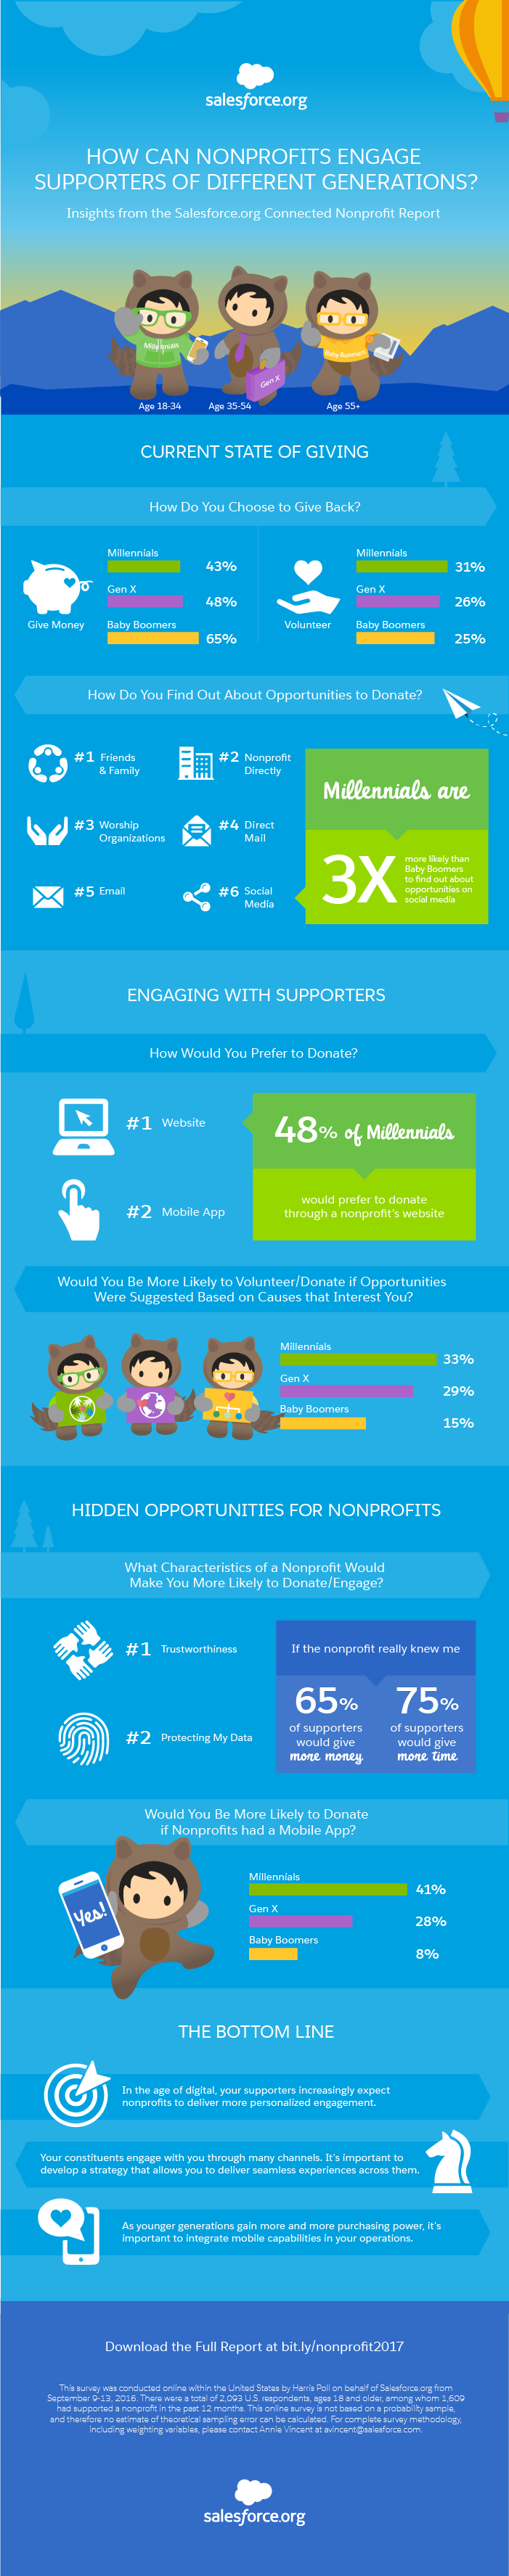 Salesforce Connected Nonprofit Infographic